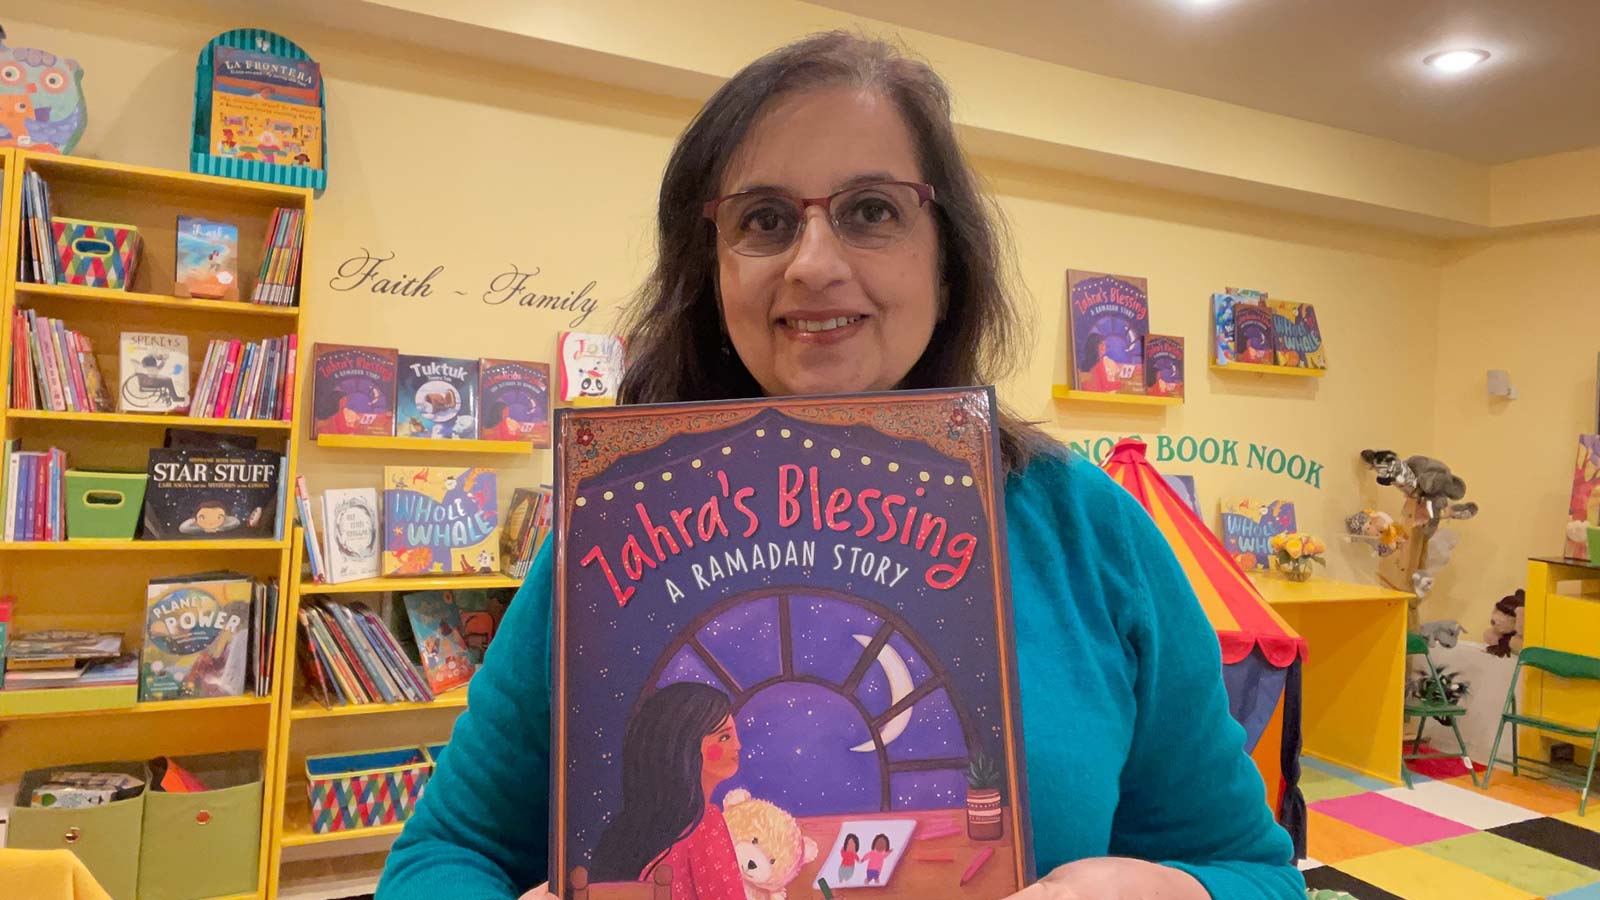 Chicago-area mom writes children’s book about Ramadan, ‘Zahra’s Blessing’